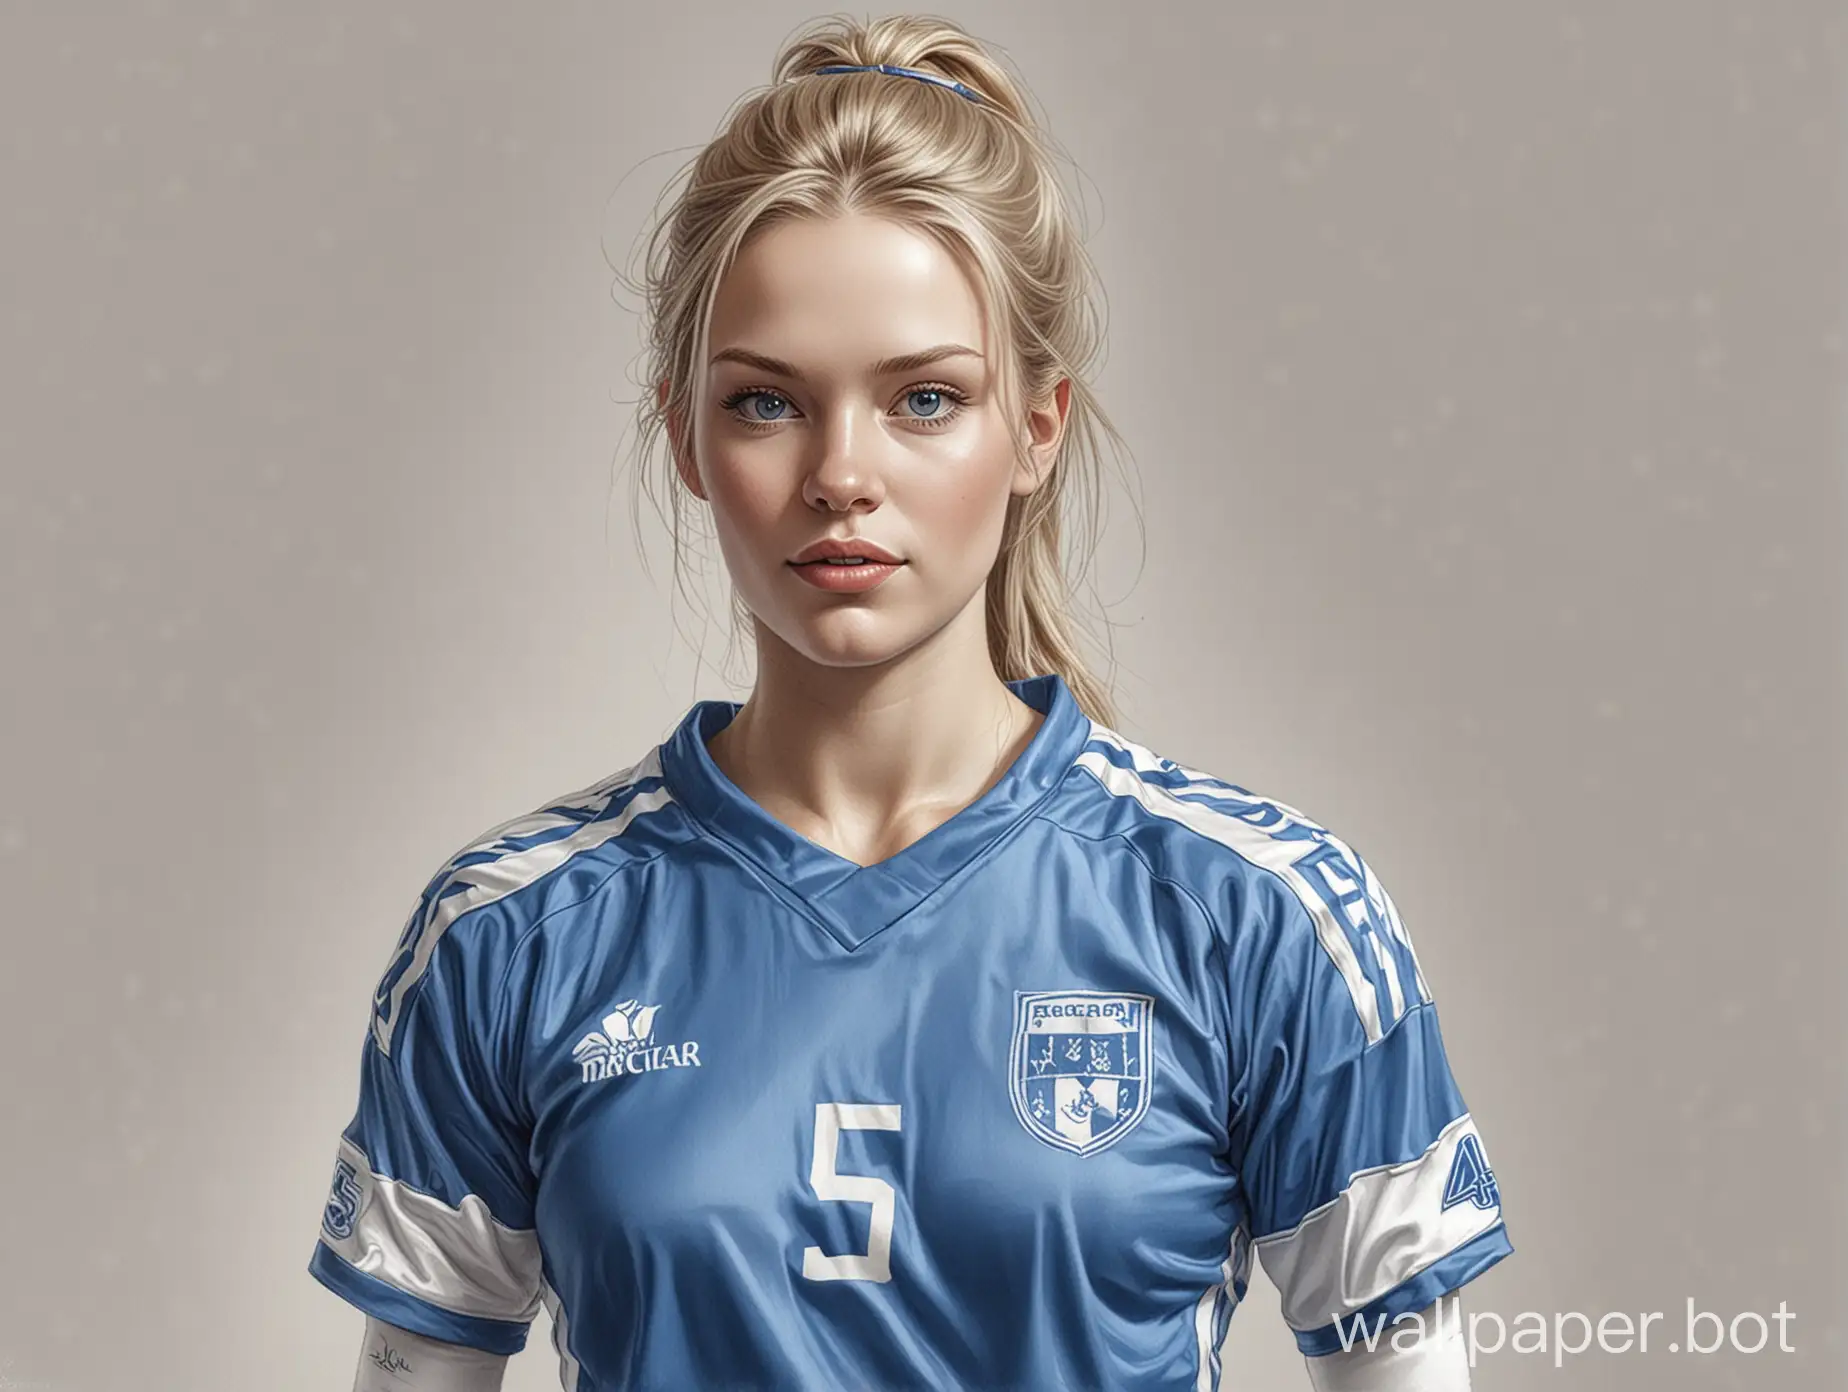 Sketch of Kaisa Vartonen 25 years old chest 4 size in blue and white soccer uniform white background high resolution pencil sketch style Boris Vallejo